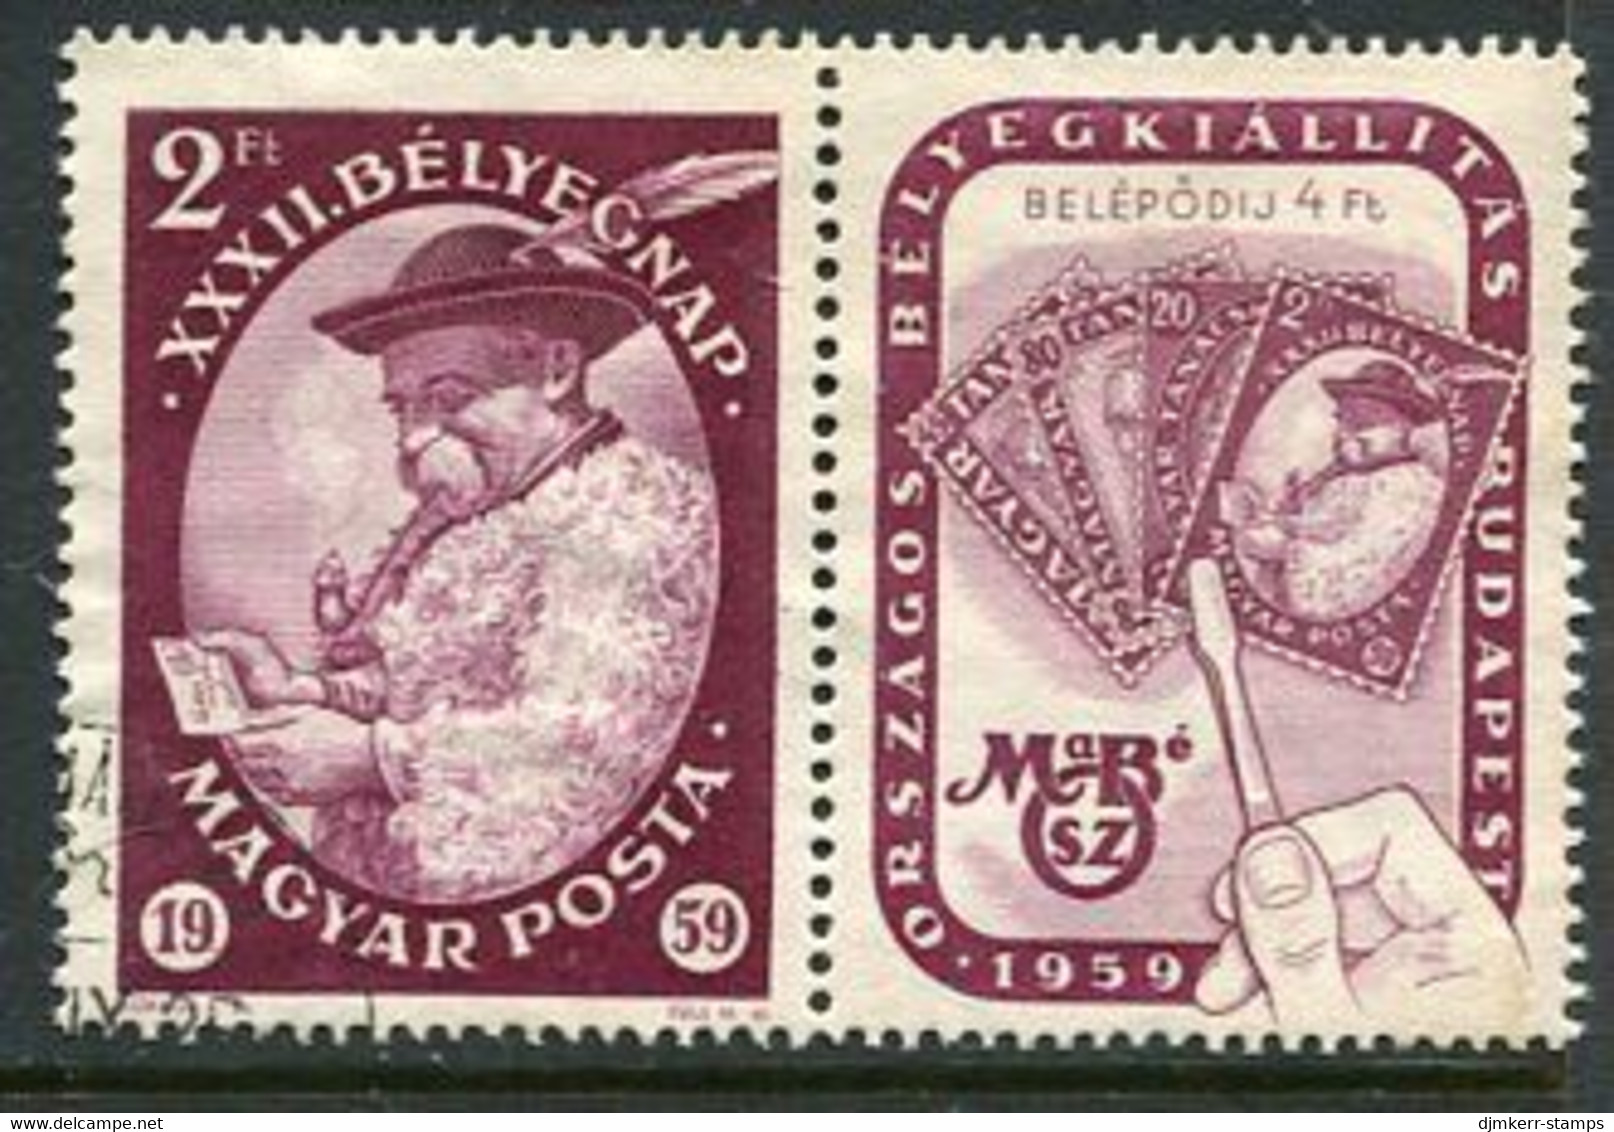 HUNGARY 1959 Stamp Day Used.  Michel; 1627 - Used Stamps